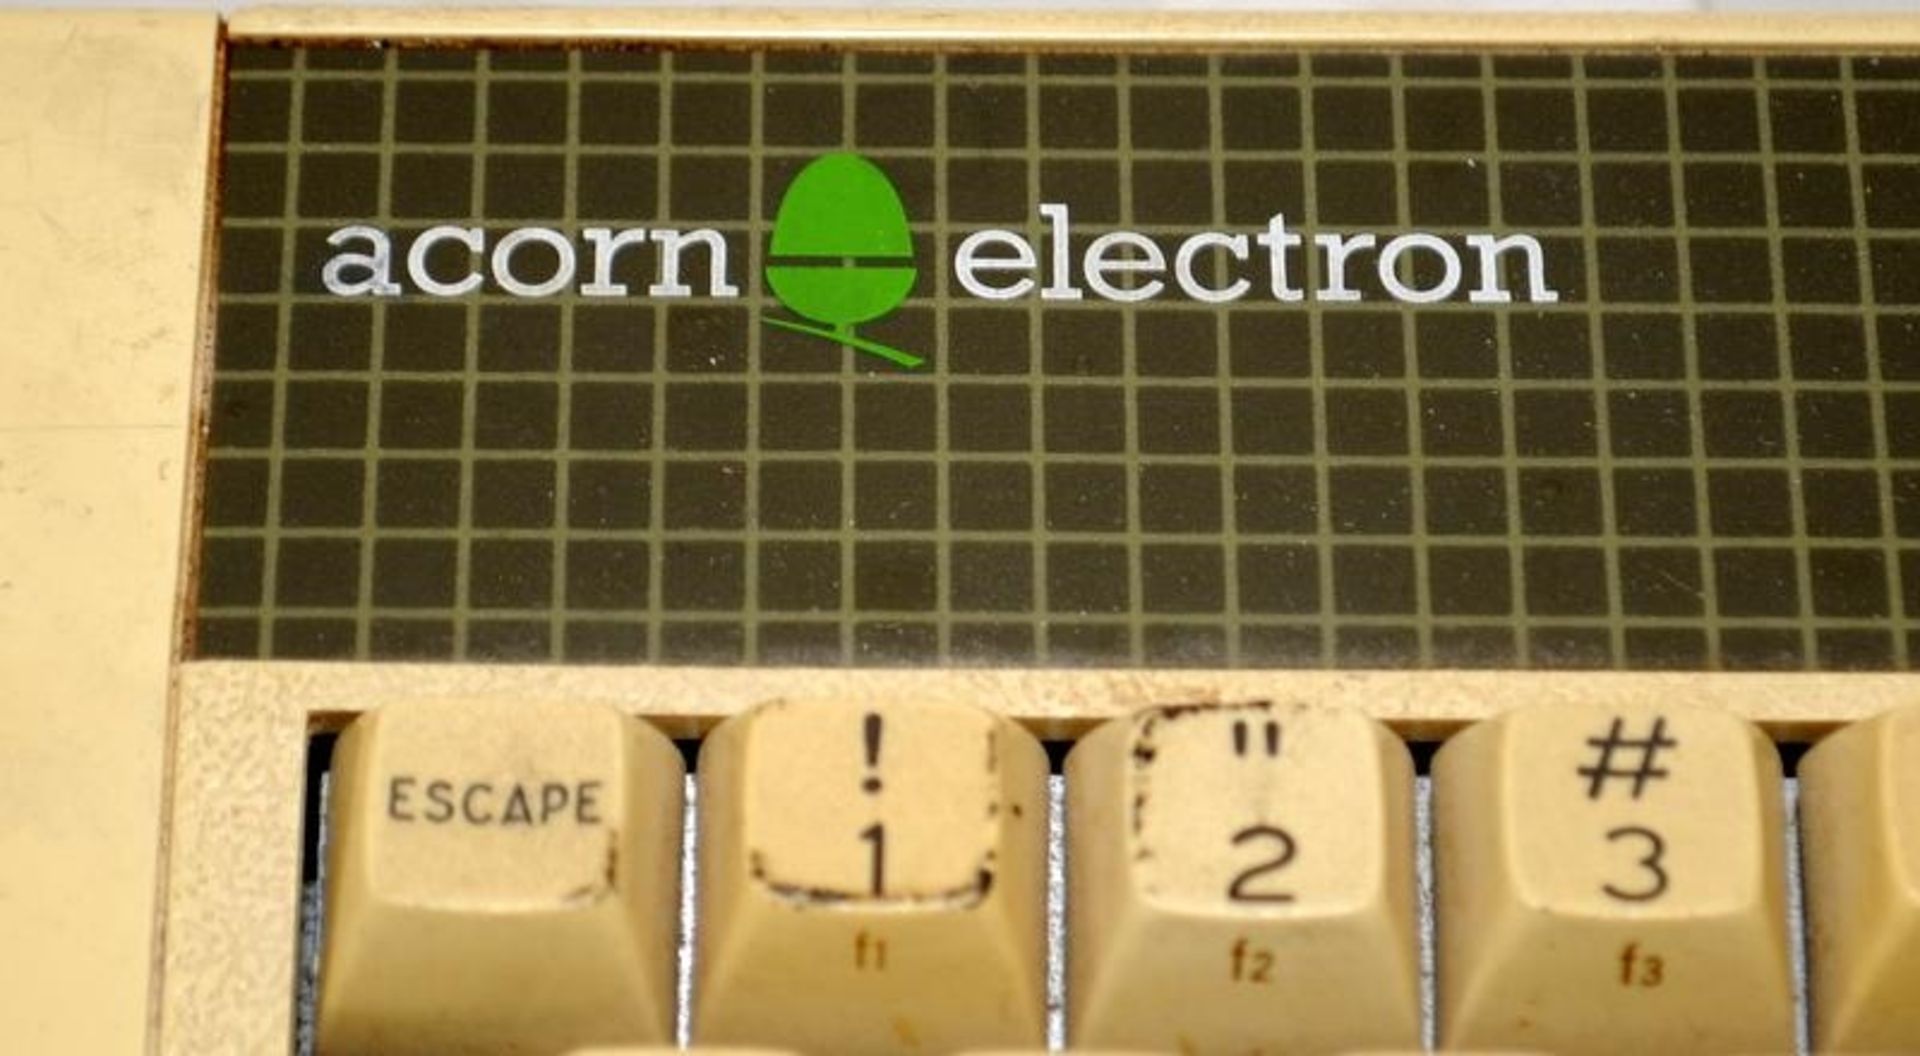 Vintage computing: 1982 Acorn Electron home computer c/w power lead. Offered untested - Image 2 of 3